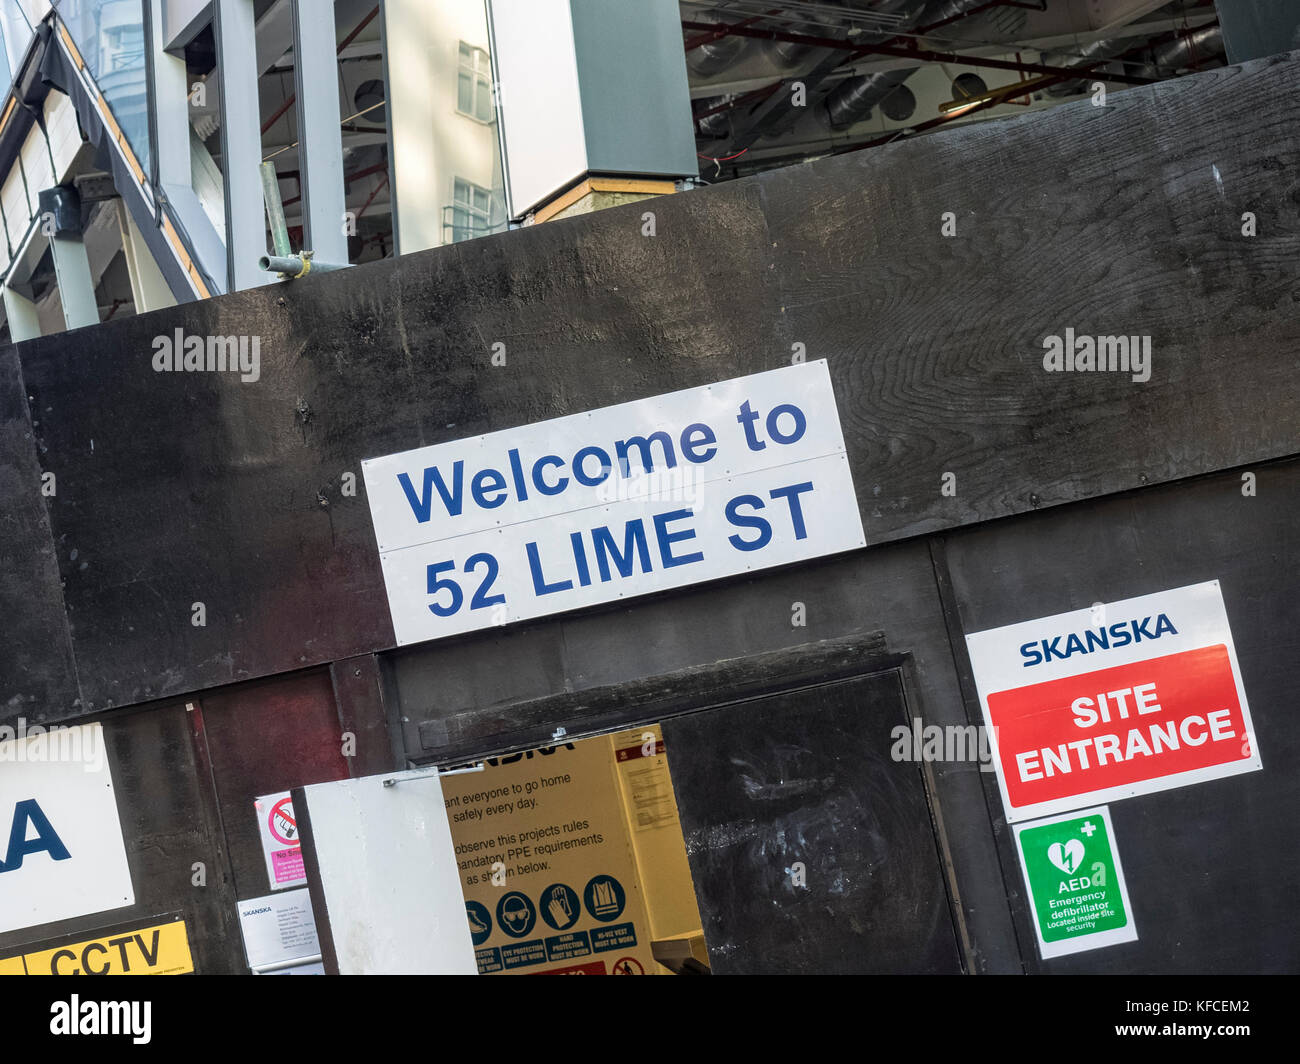 LONDON, UK - AUGUST 25, 2017:  Entrance to the construction site at 52 Lime street in the City of London Stock Photo